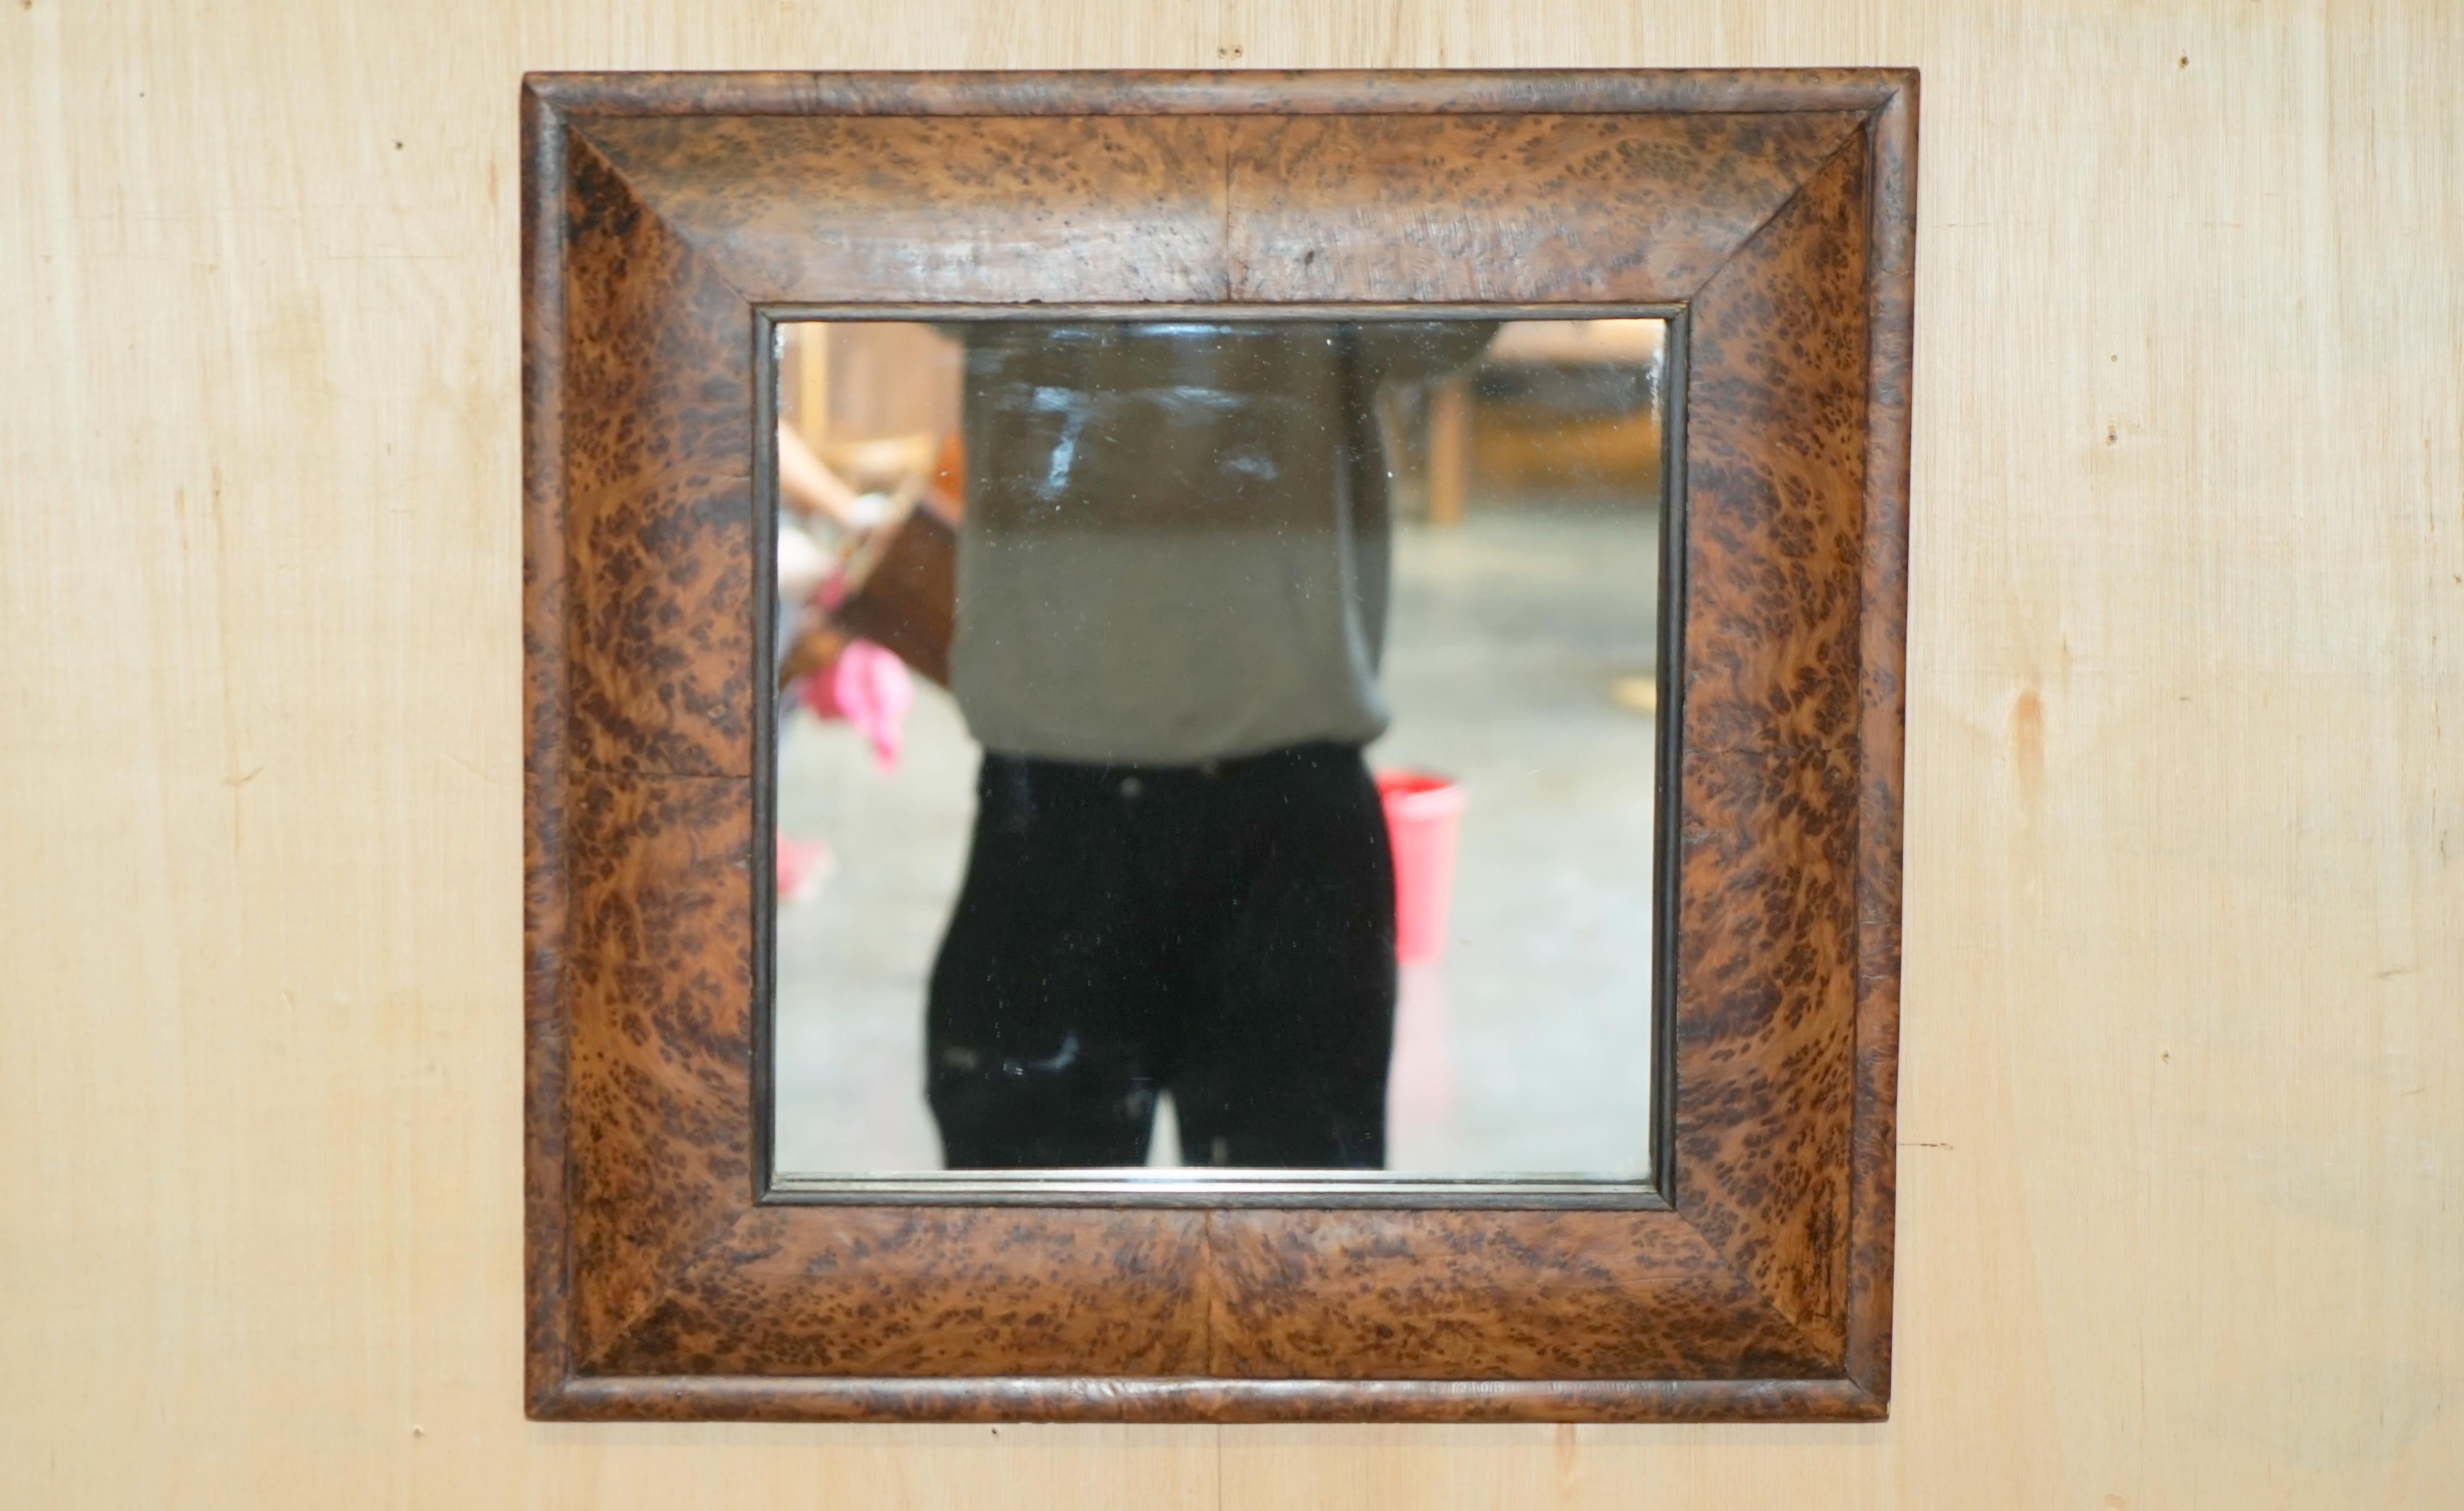 Royal House Antiques

Royal House Antiques is delighted to offer for sale this super rare and highly collectable antique Georgian early 19th century cushion framed mirror with exquisite burr & burl Amboyna wood frame

Please note the delivery fee